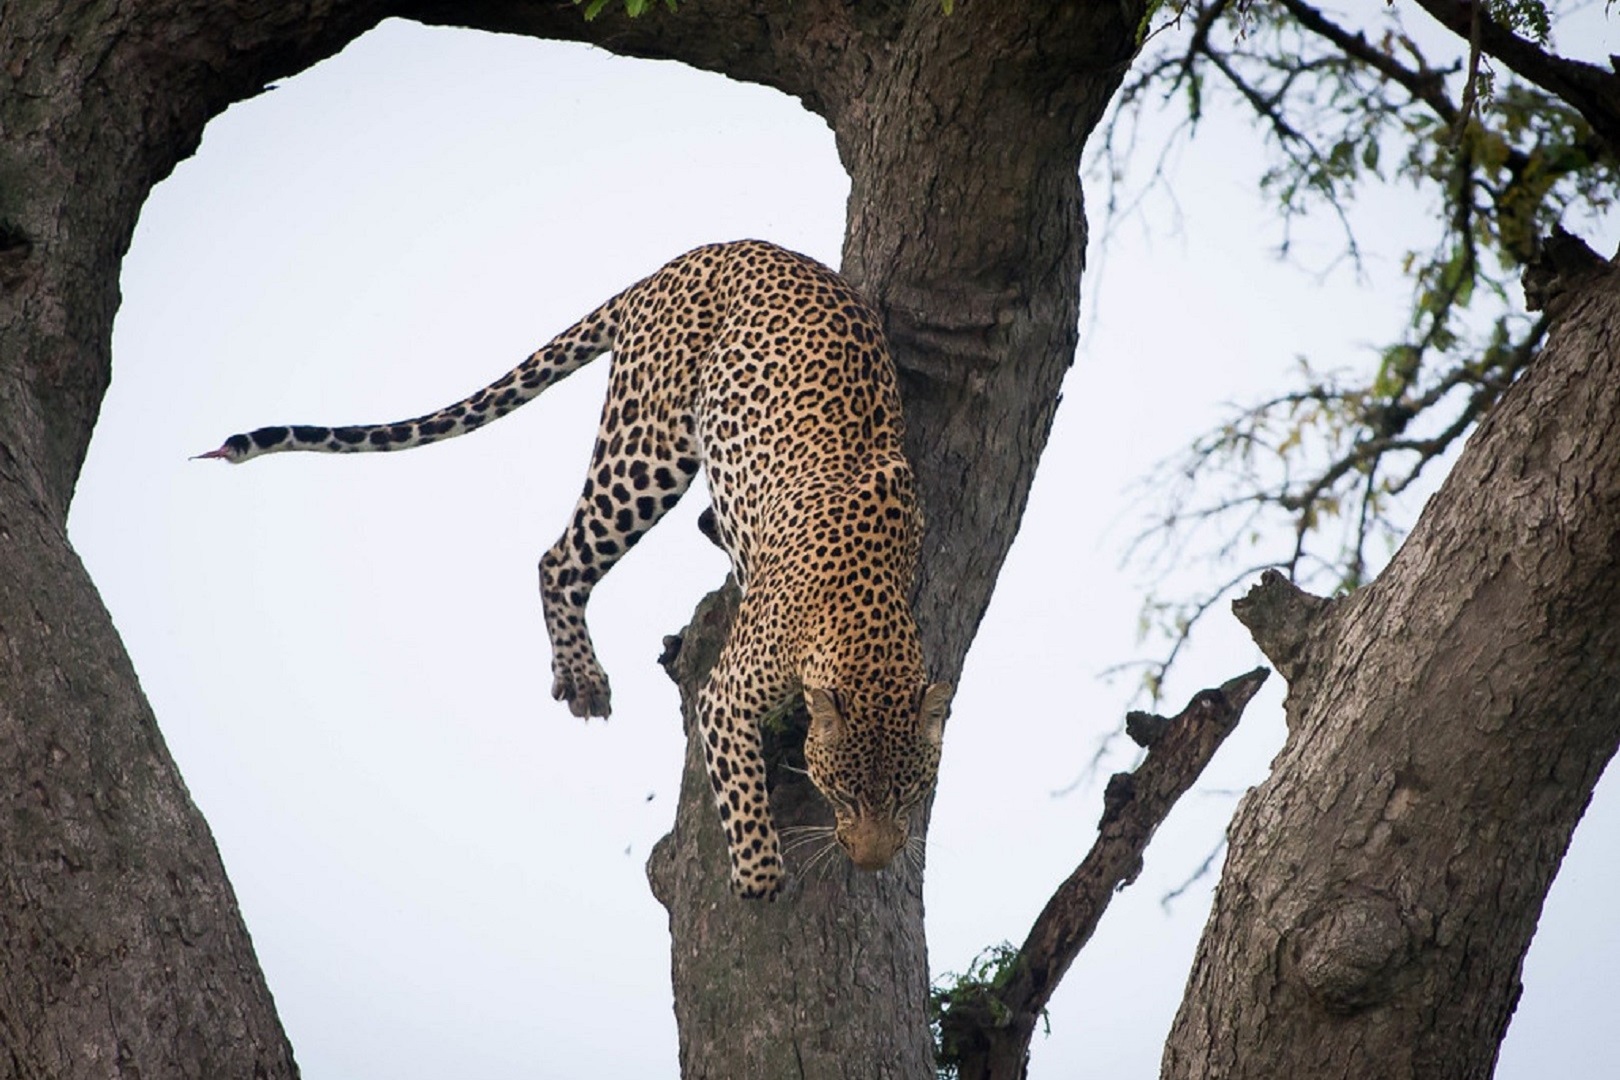 A leopard spotted in Queen Elizabeth National Park